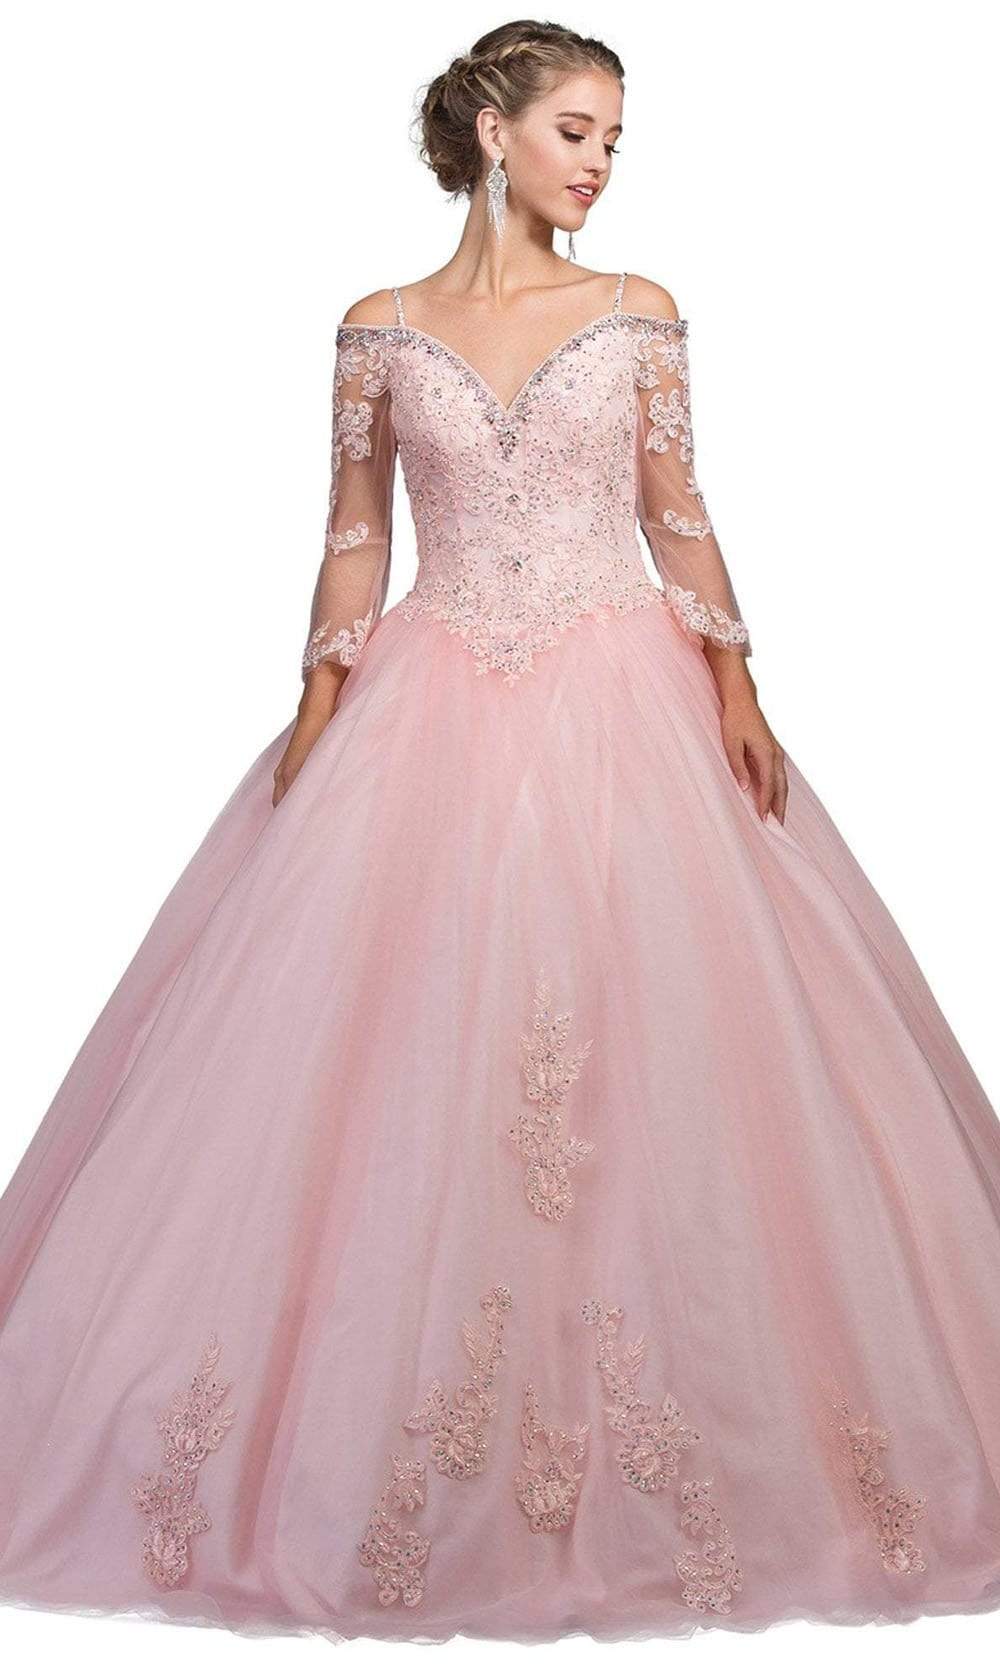 Dancing Queen - 1266 Embellished Lace Fantasy Ballgown